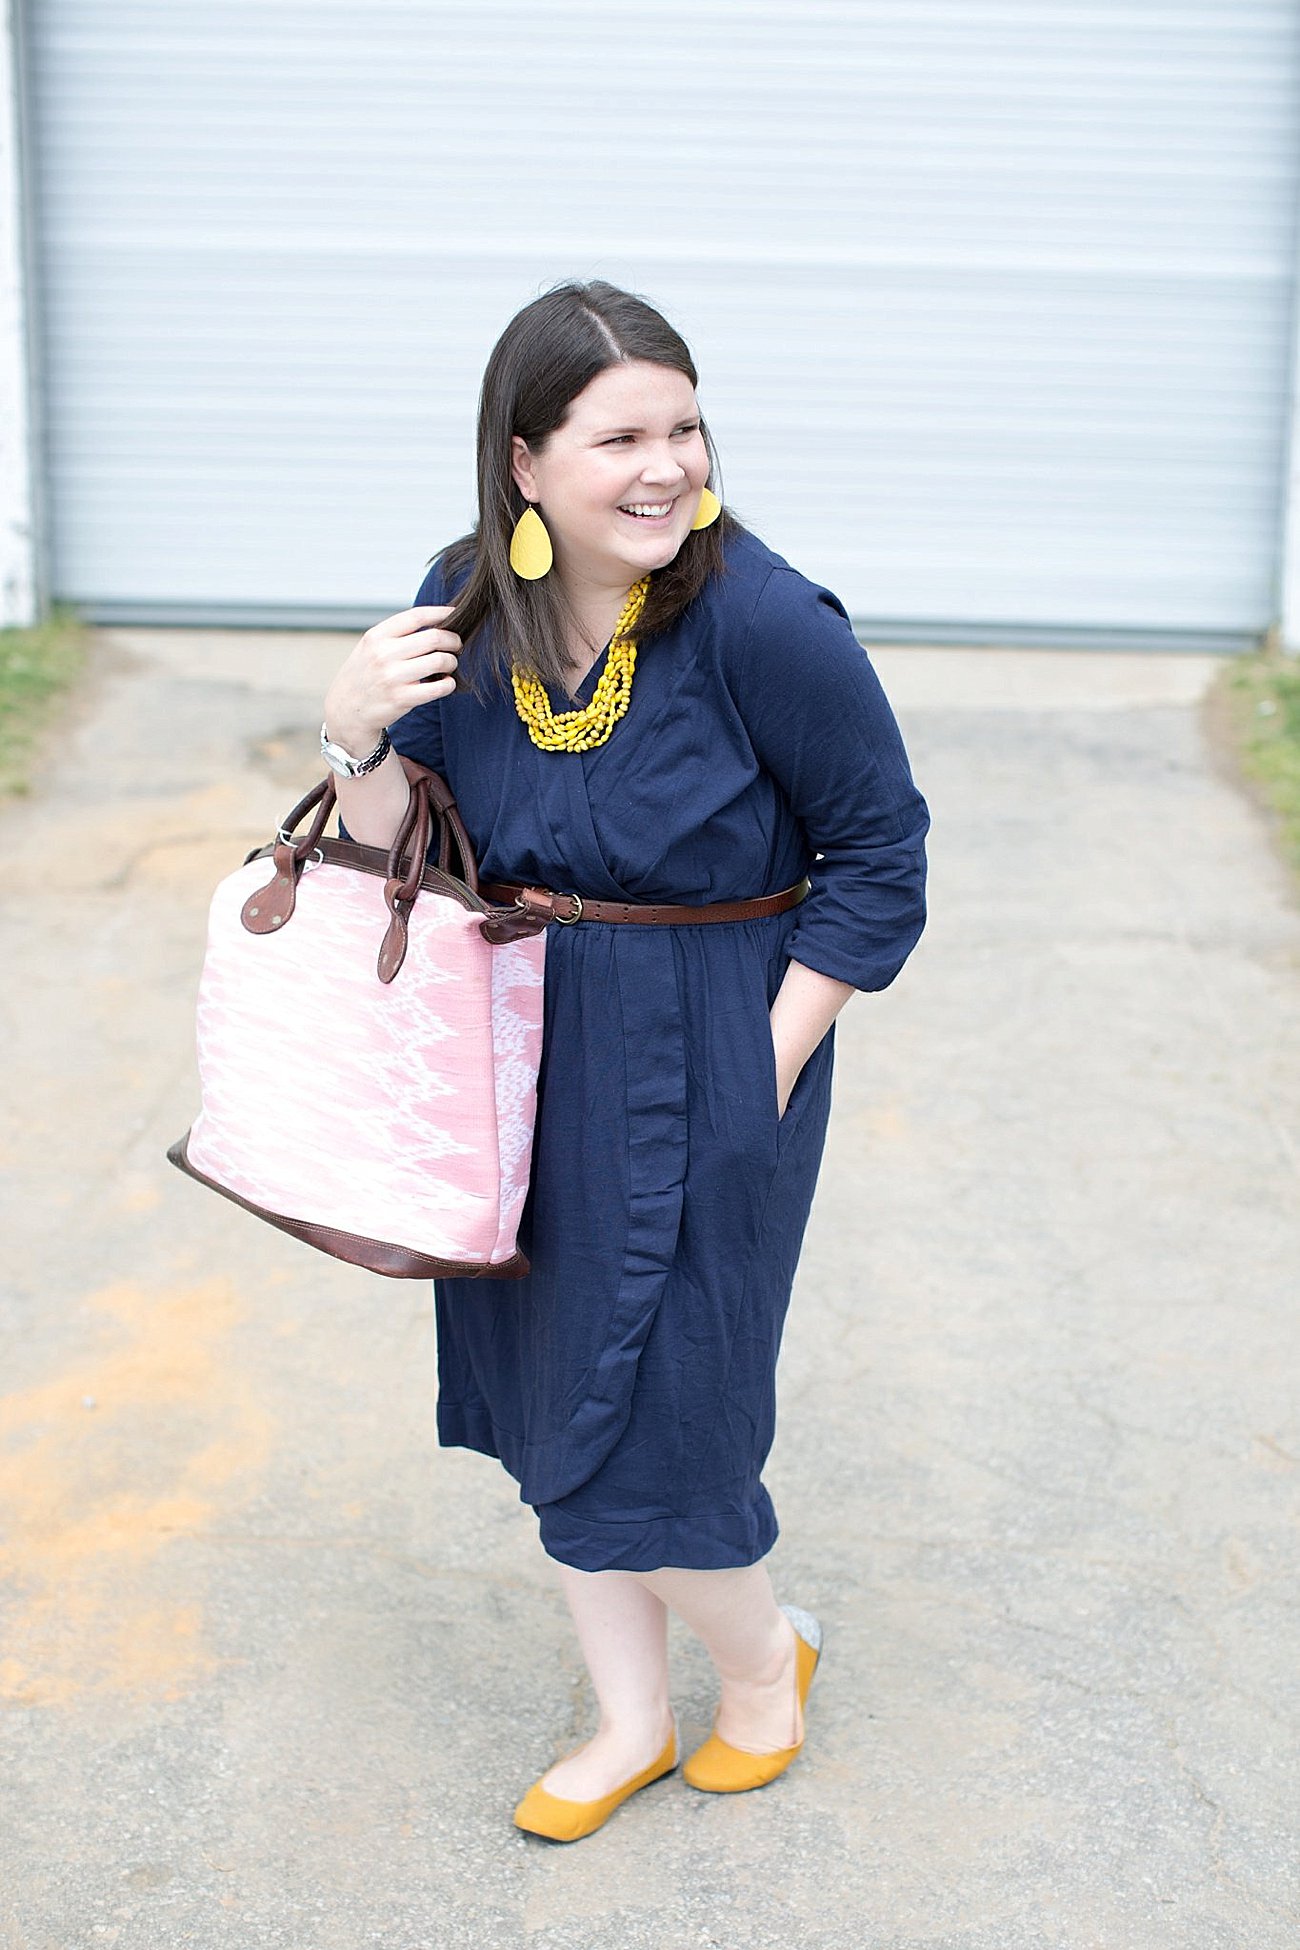 Tonle Design "Tess" Wrap Dress, Tribe Alive Weekender Bag, Sela Designs necklace, Nickel and Suede earrings, The Root Collective Shoes | North Carolina Fashion & Style Blogger | Ethical and Fair Trade Fashion (8)